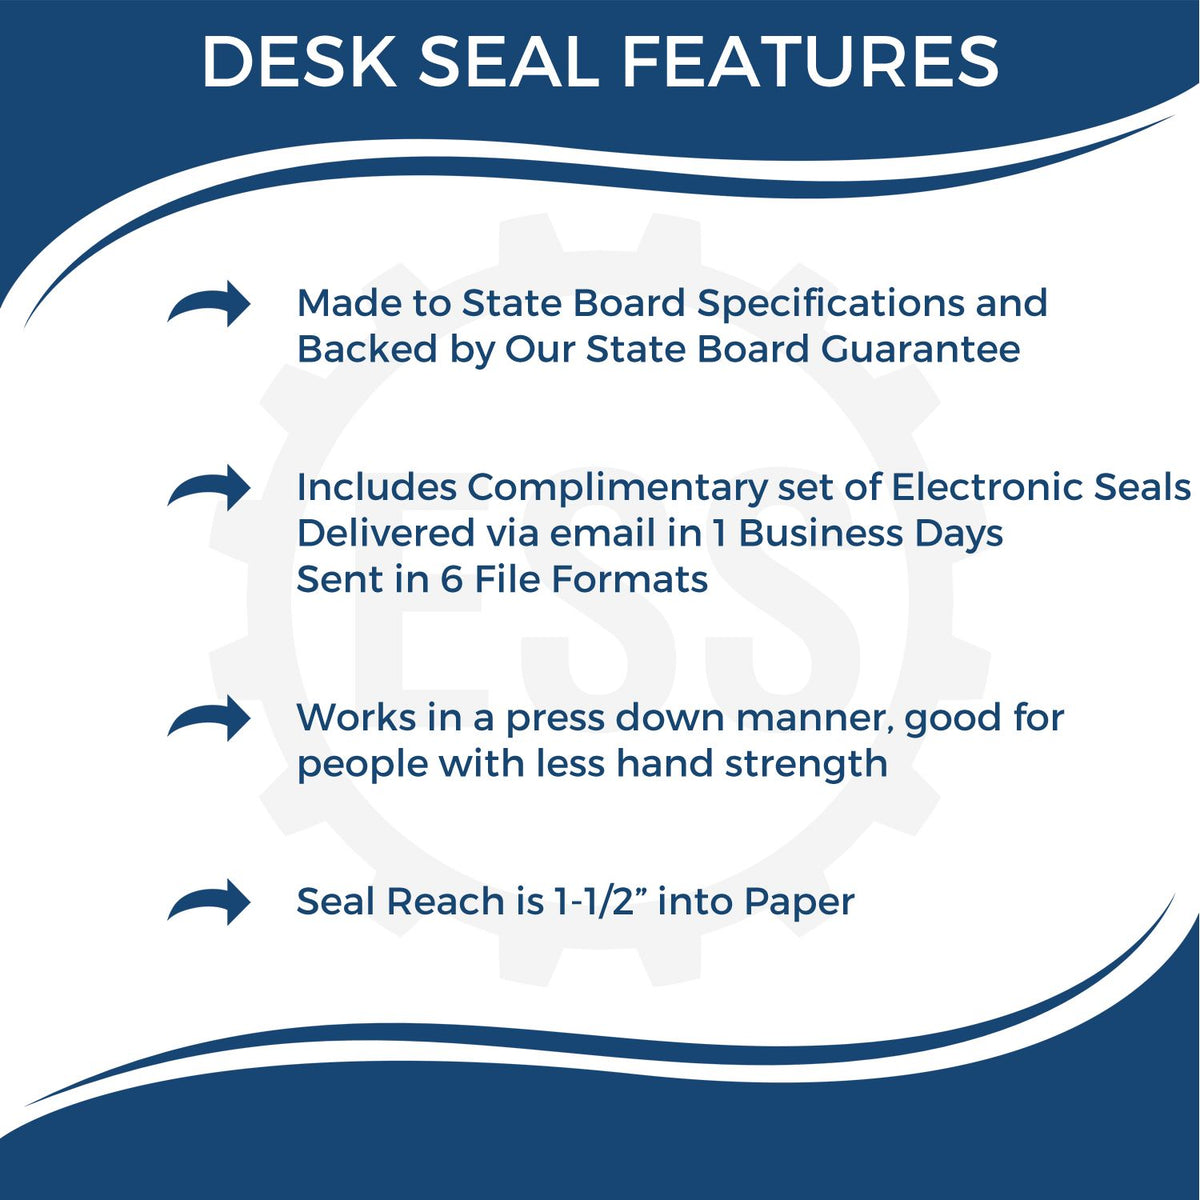 A picture of an infographic highlighting the selling points for the Guam Geologist Desk Seal